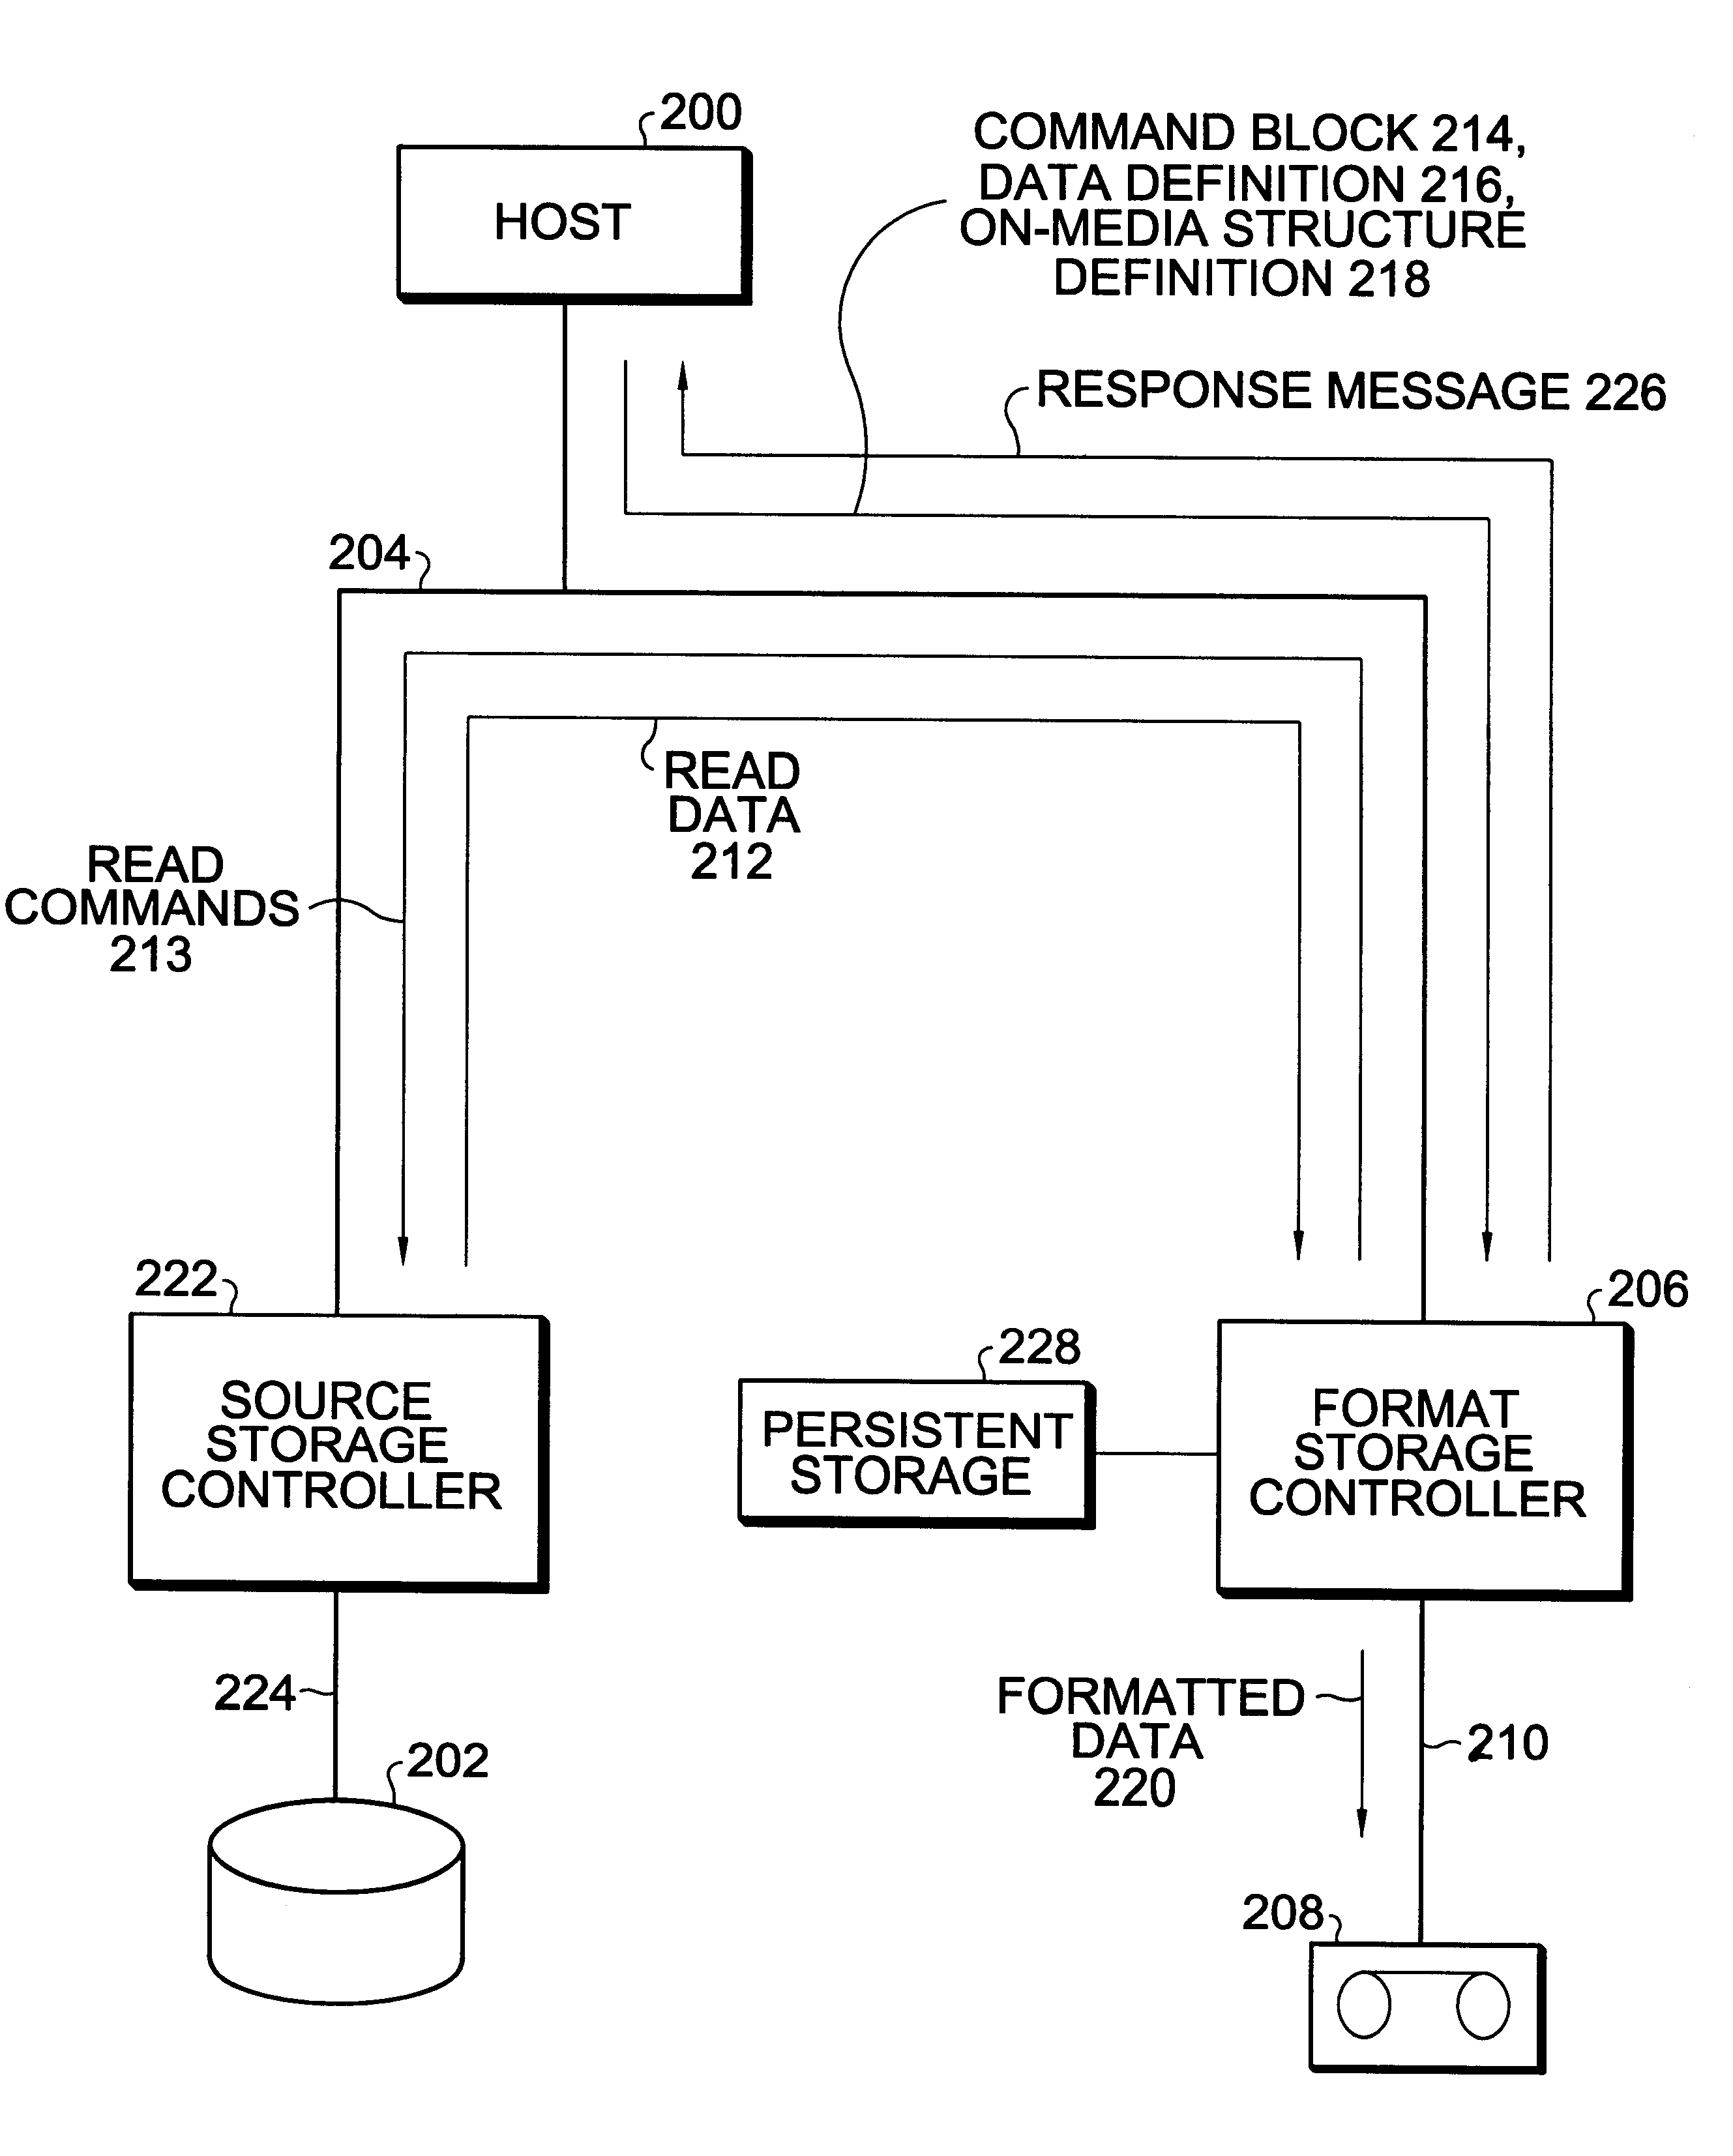 Hardware assisted formatted data transfer system having a source storage controller and a formatting storage controller receiving on-media structure definition and a data definition